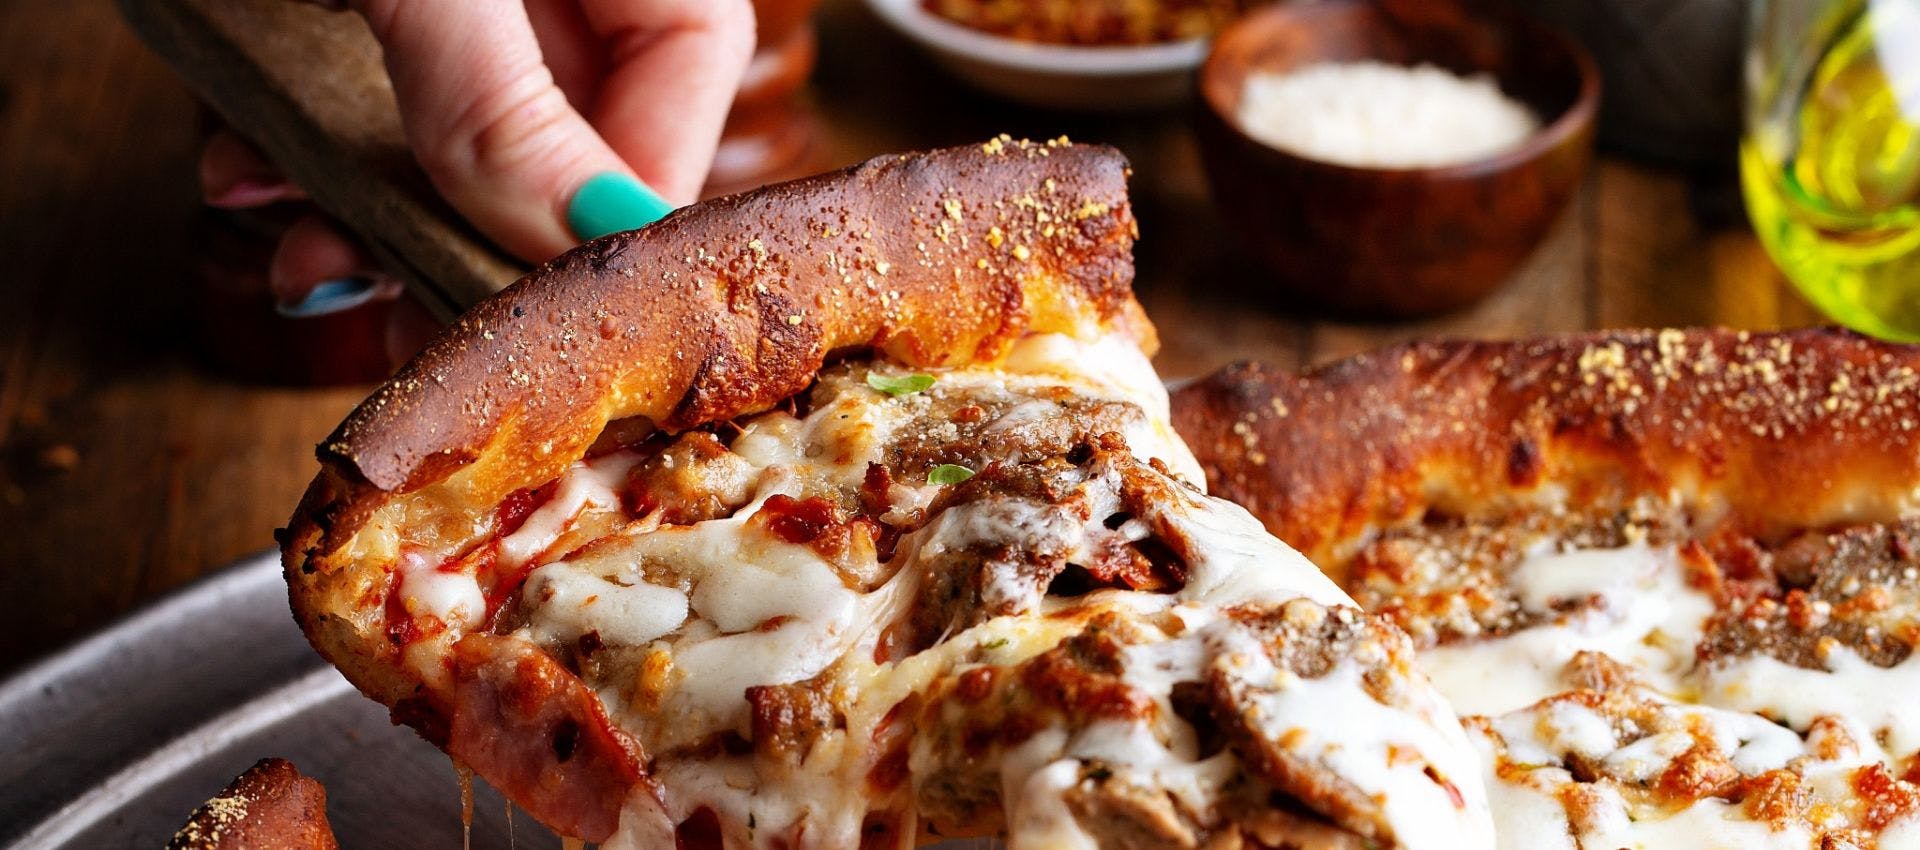 Chicago Deep Dish Pizza (Offers Catering!) hero